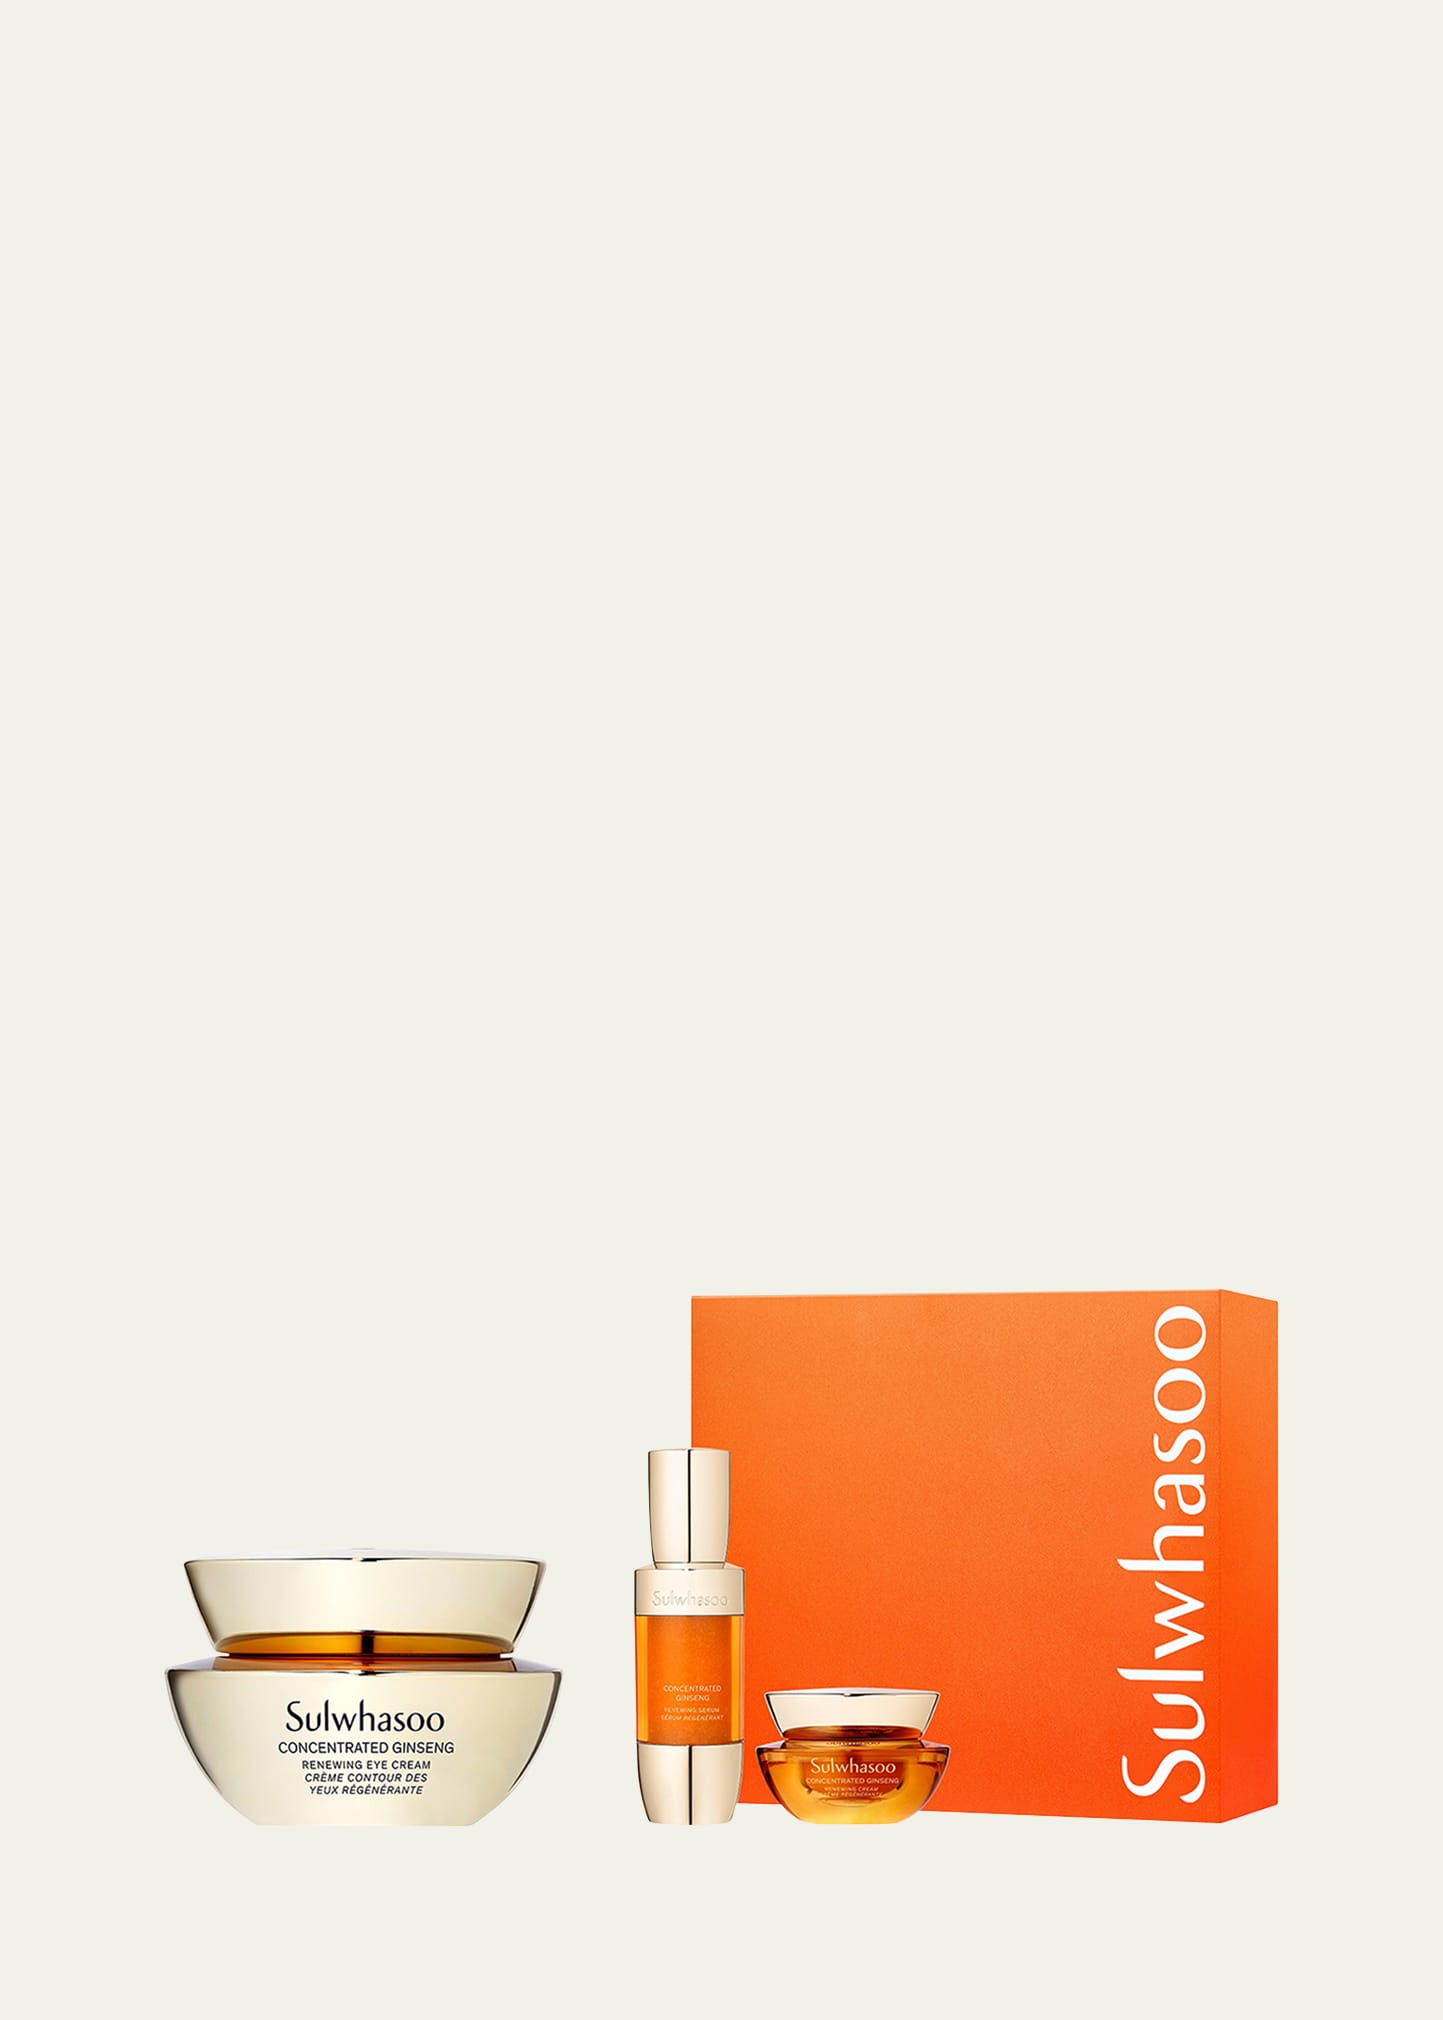 Shop Sulwhasoo Concentrated Ginseng Renewing Eye Cream Set